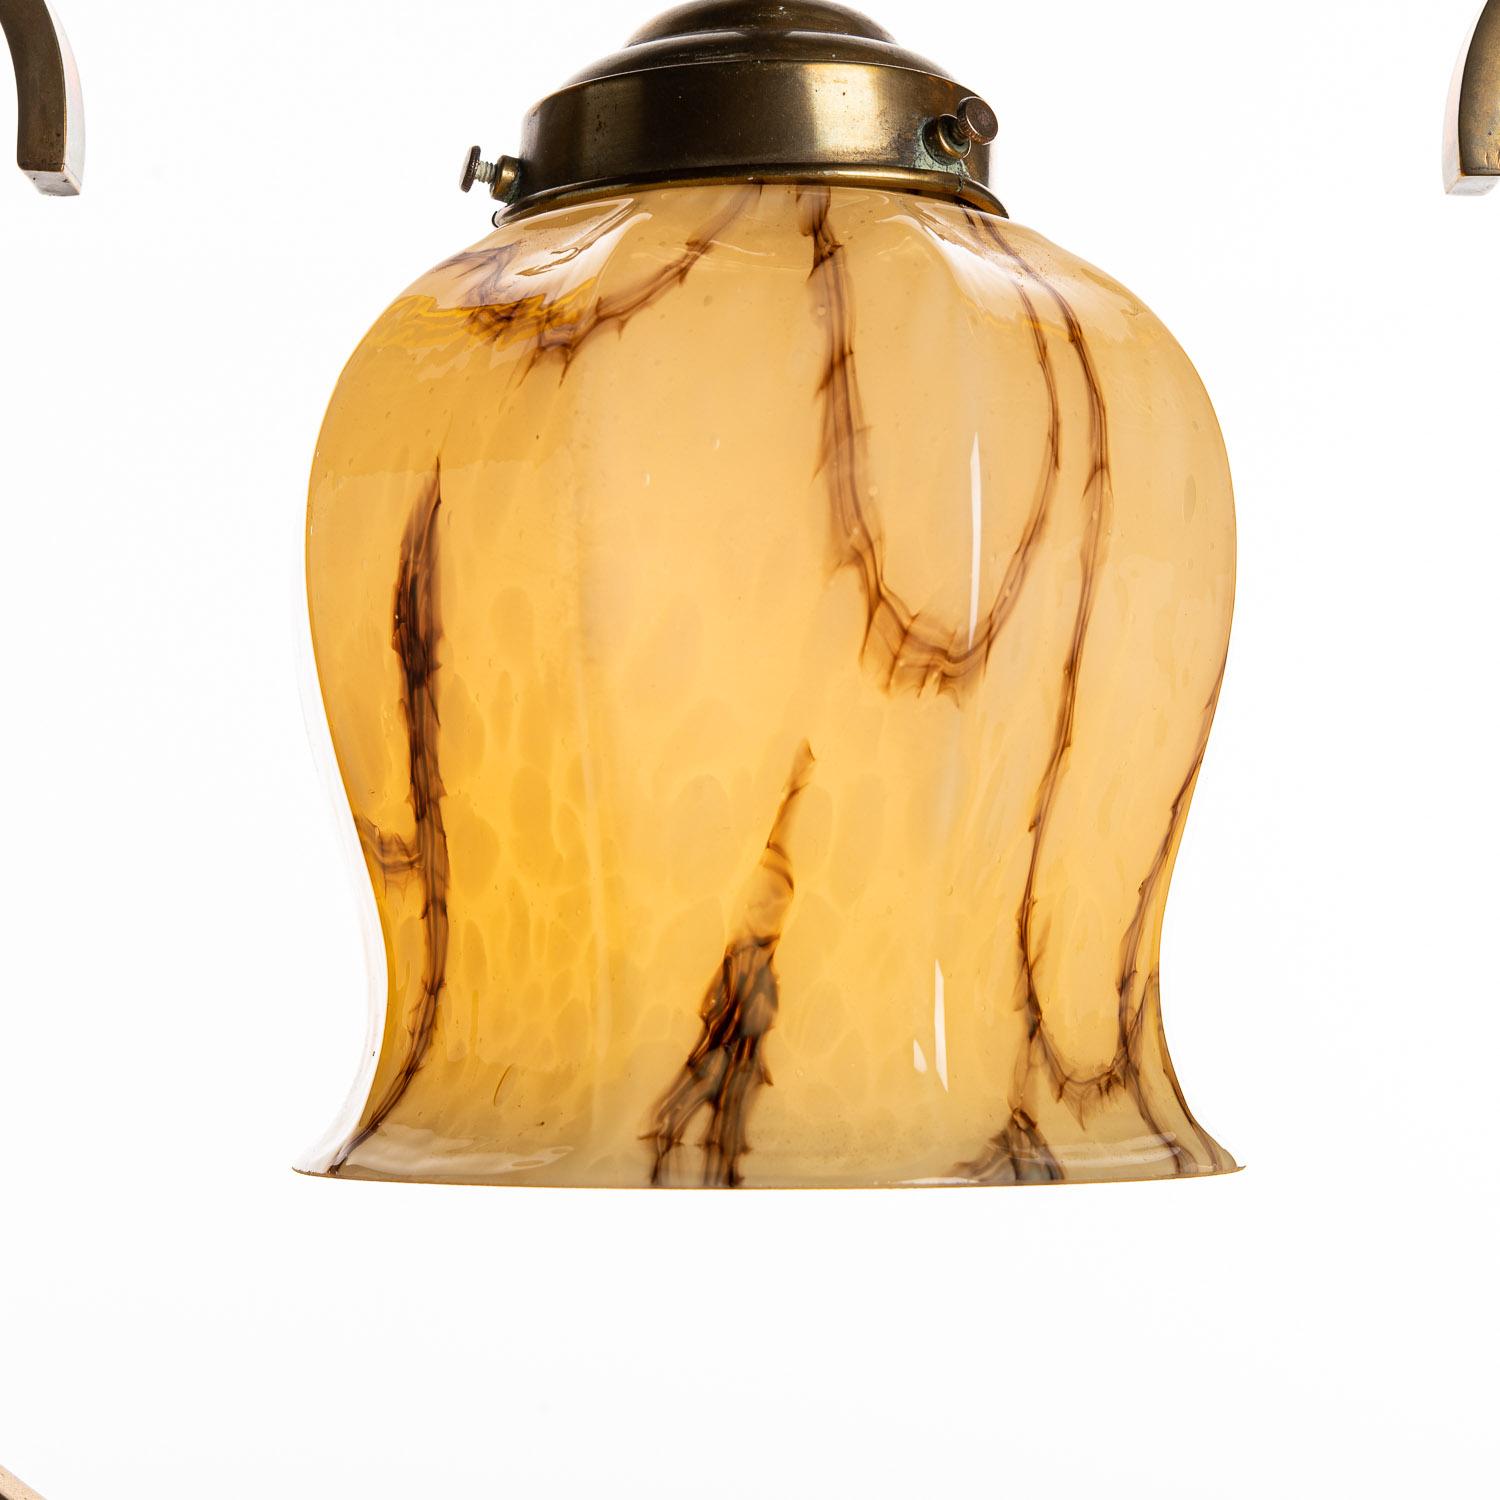 1950s Glass, Brass and Acrylic Art Deco Pendant Attributed to Jacques Arnet For Sale 1